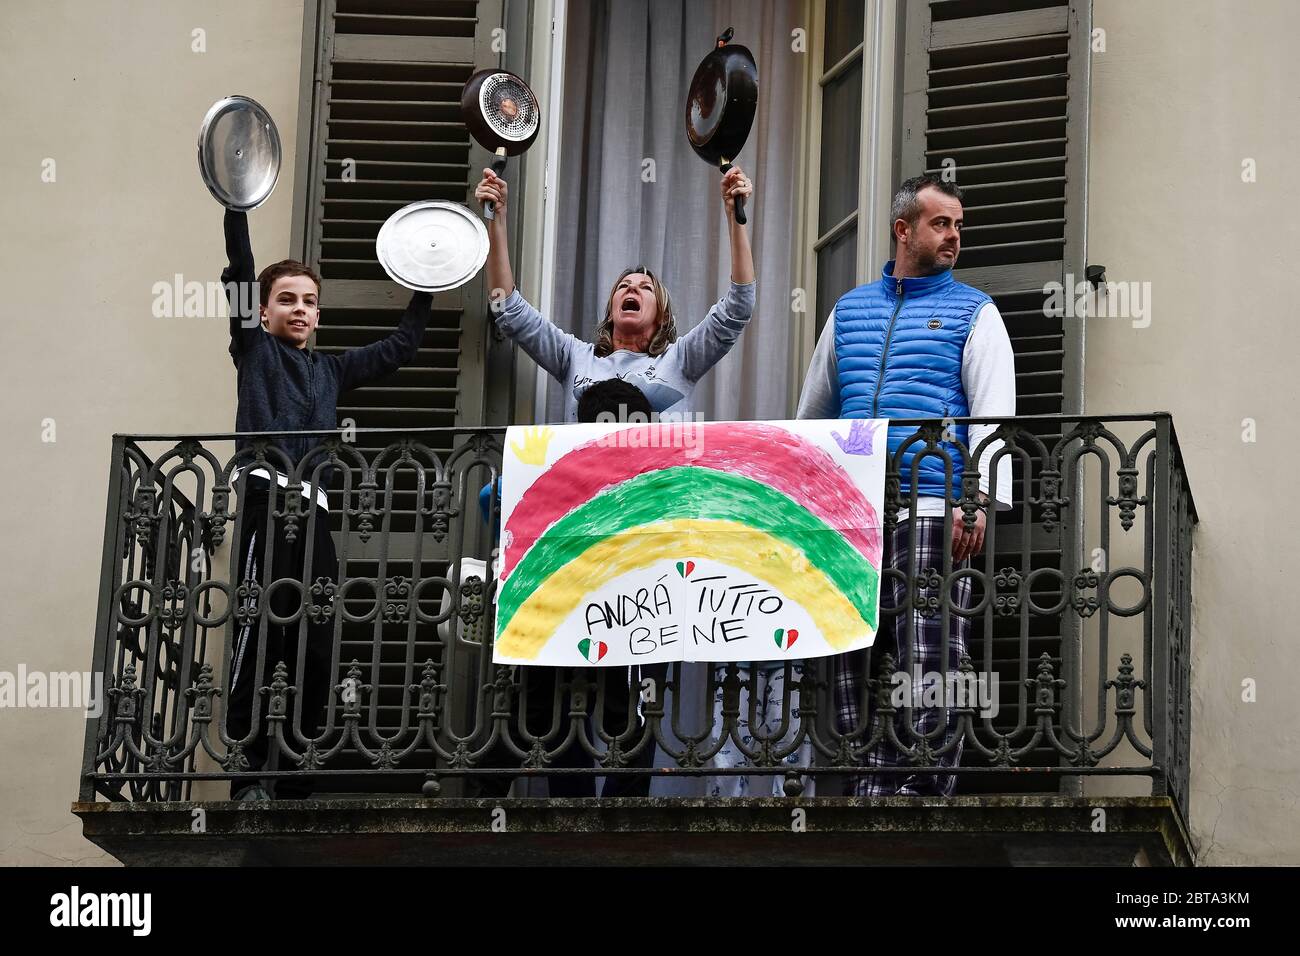 Turin, Italy - 13 March, 2020: A family play lids of pots and pans from balcony of their home where there is a banner reading 'Everything will be fine' in the neighborhood San Salvario during a flash mob launched throughout Italy to bring people together. The Italian government imposed unprecedented restrictions to halt the spread of COVID-19 coronavirus outbreak, among other measures people movements are allowed only for work, for buying essential goods and for health reasons. Credit: Nicolò Campo/Alamy Live News Stock Photo